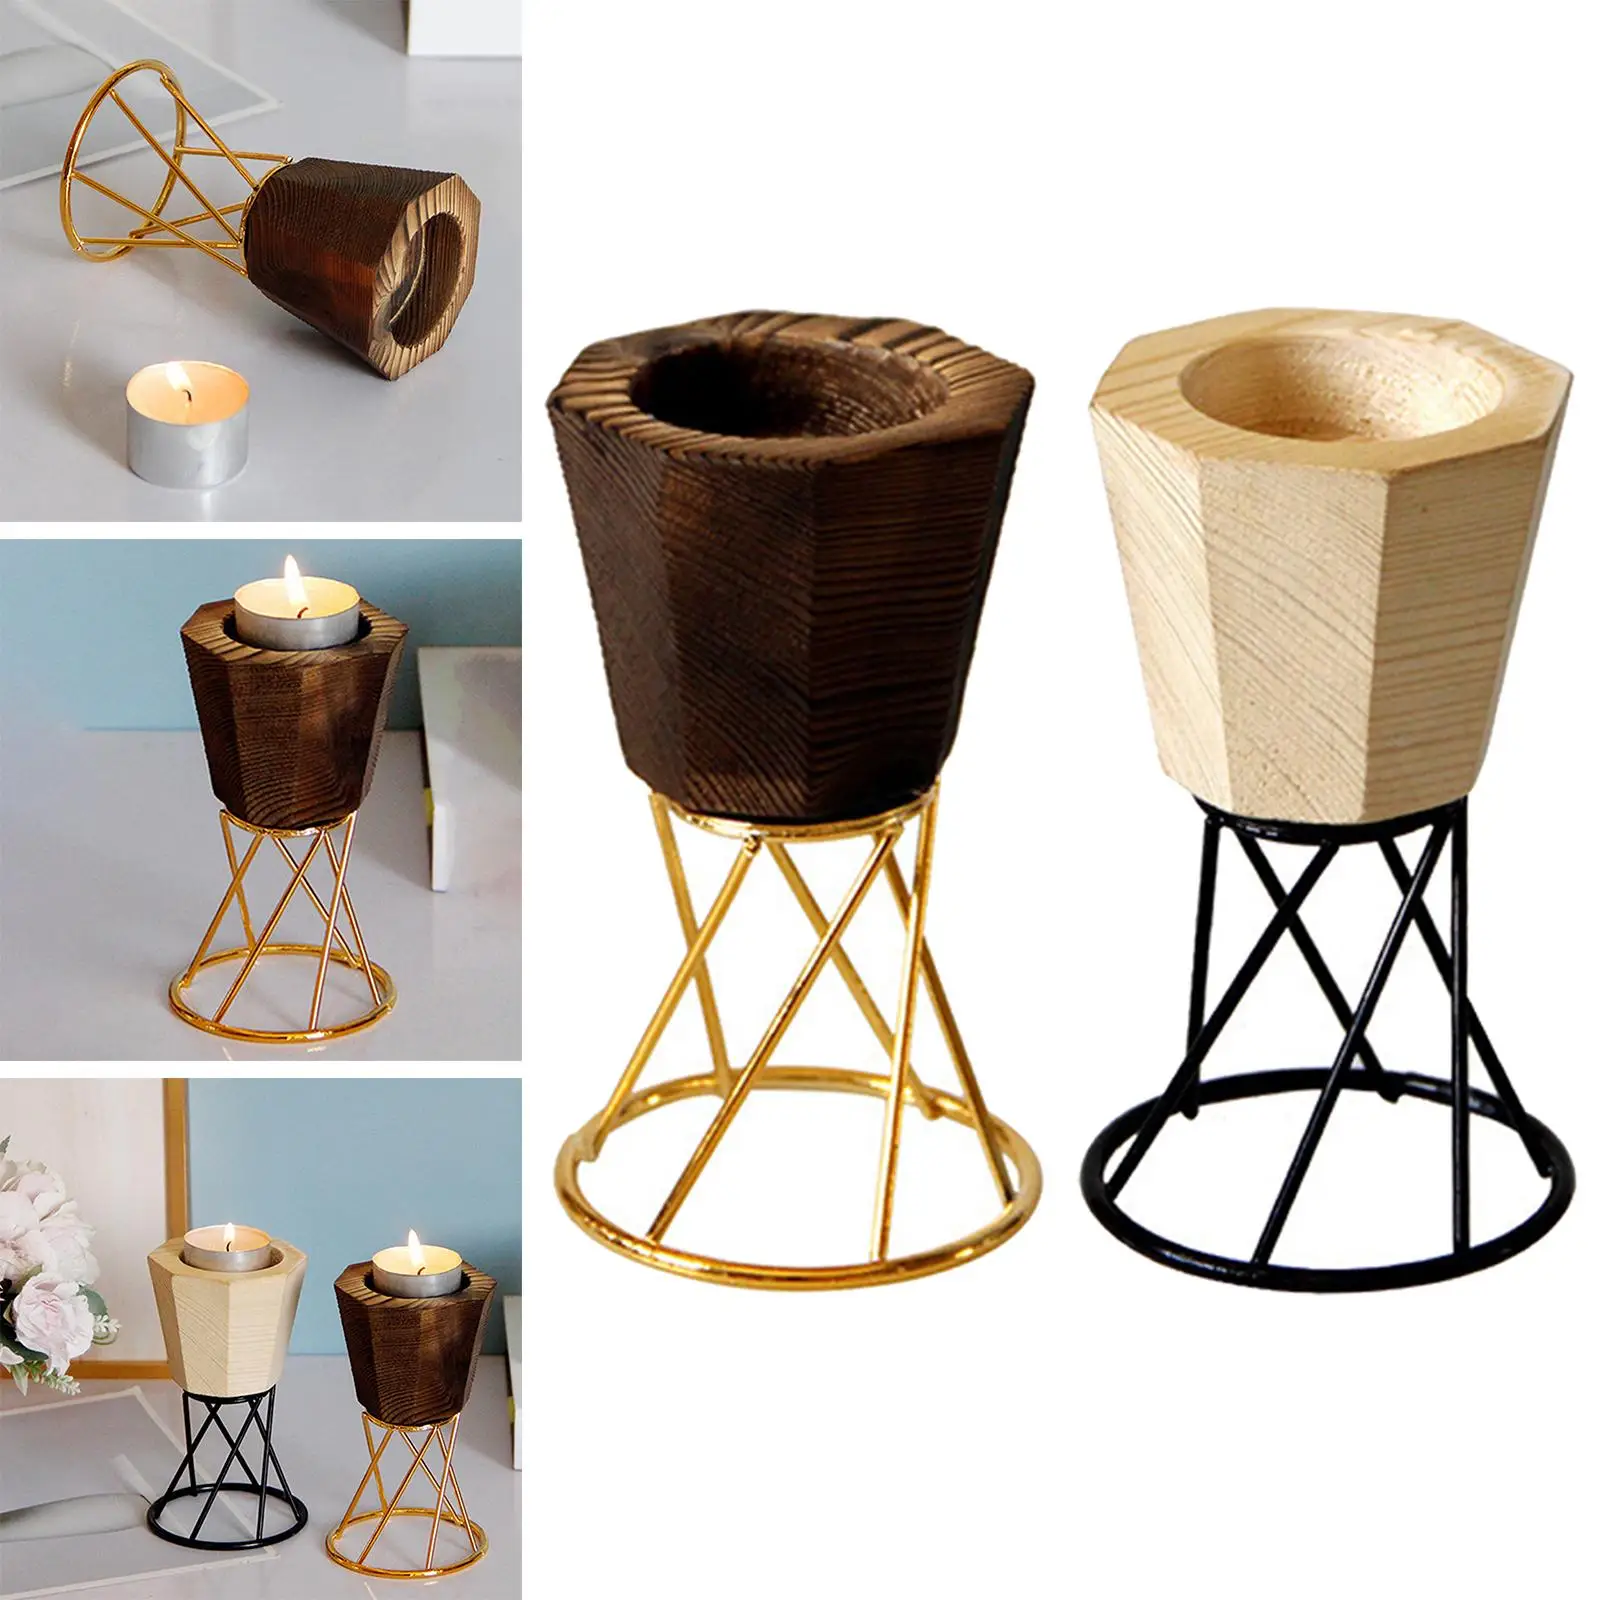 Wooden Candle Holders Tealight Candlestick Living Room Candelabras Candleholders for Fireplace Mantel Hotel Home Farmhouse Party